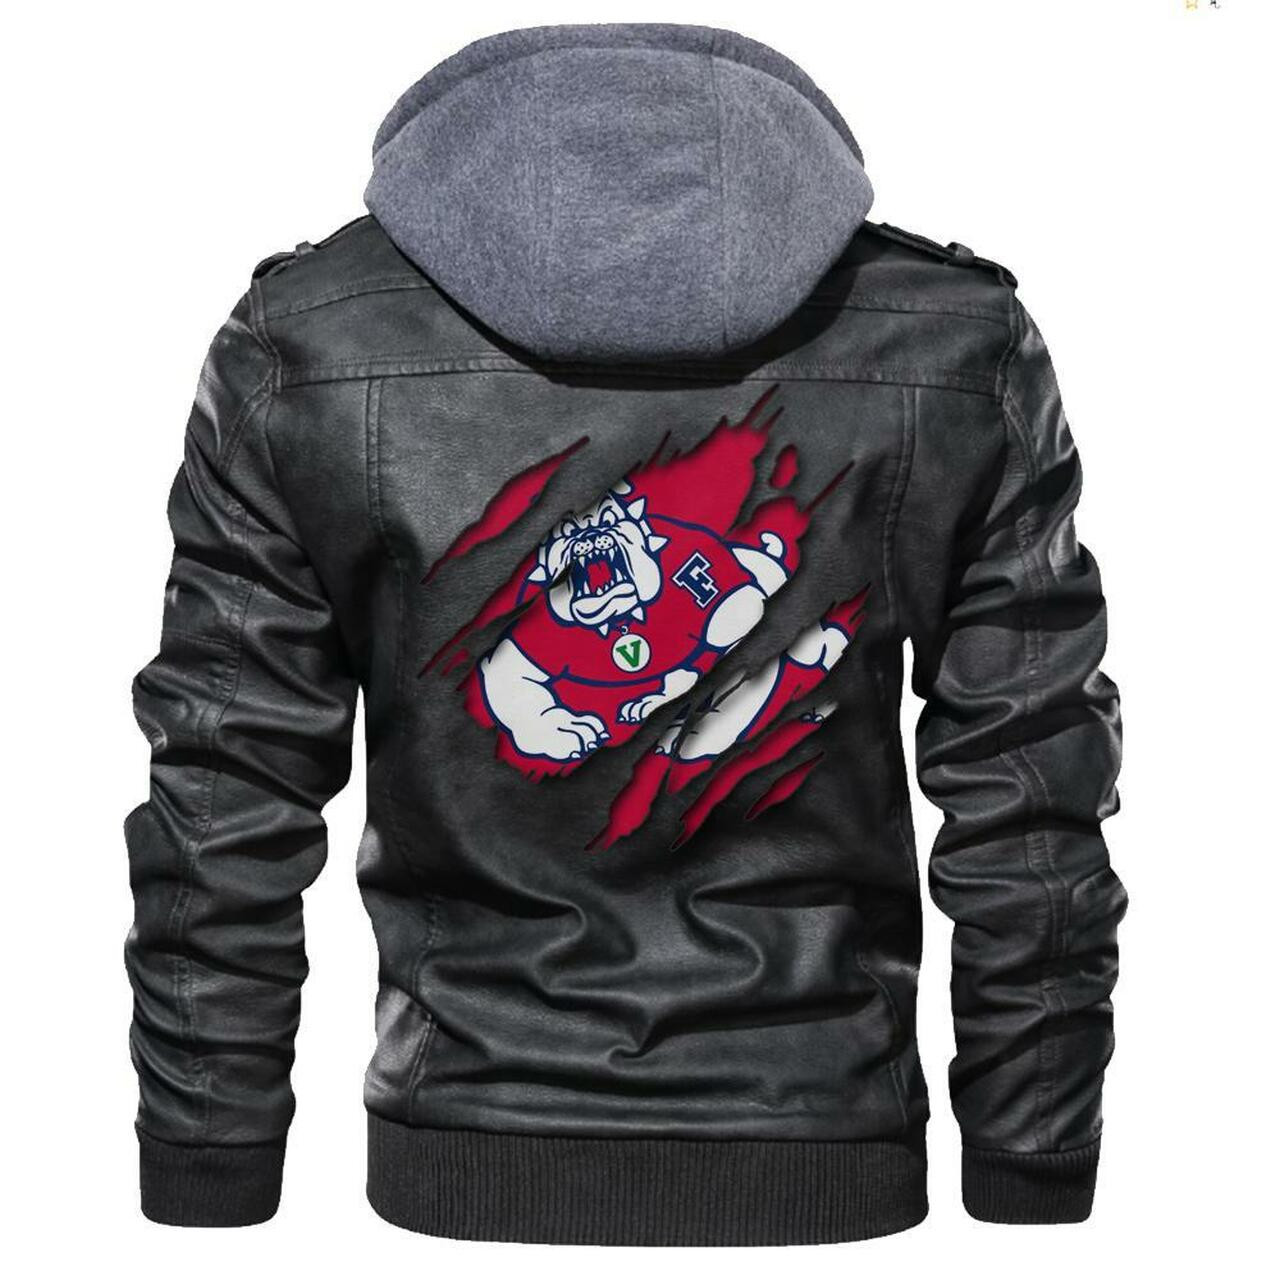 Don't wait another minute, Get Hot Leather Jacket today 127